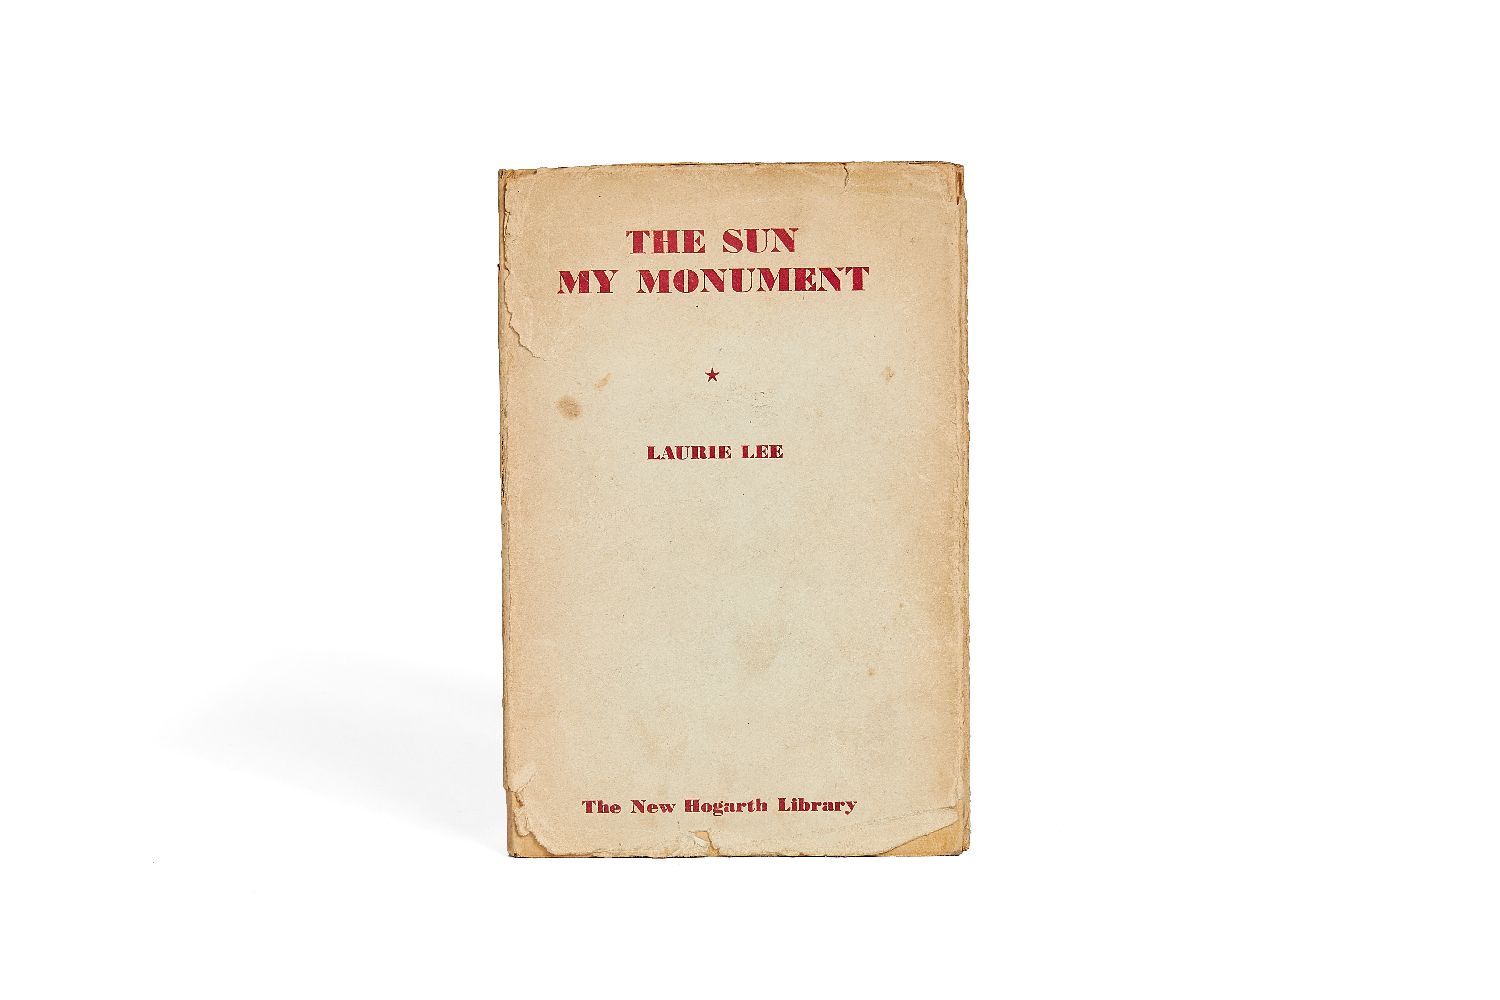 Ɵ Laurie Lee, The Sun my Monument, first edition in book form, Iris Murdoch's personal copy